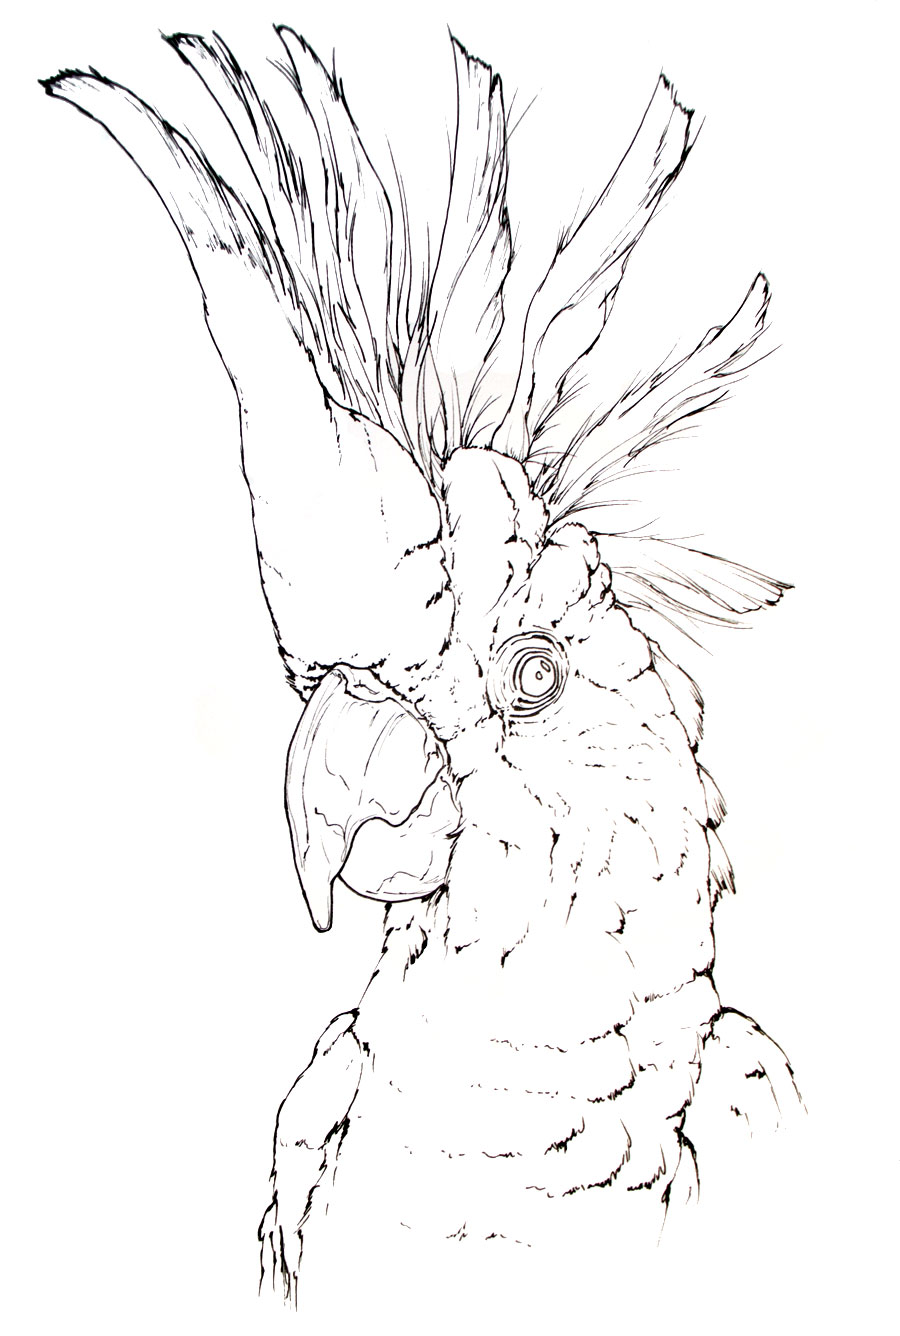 Coloring page to print of a sulphur-crested cockatoo parrot drawing - Cacatua galerita scientific illustration